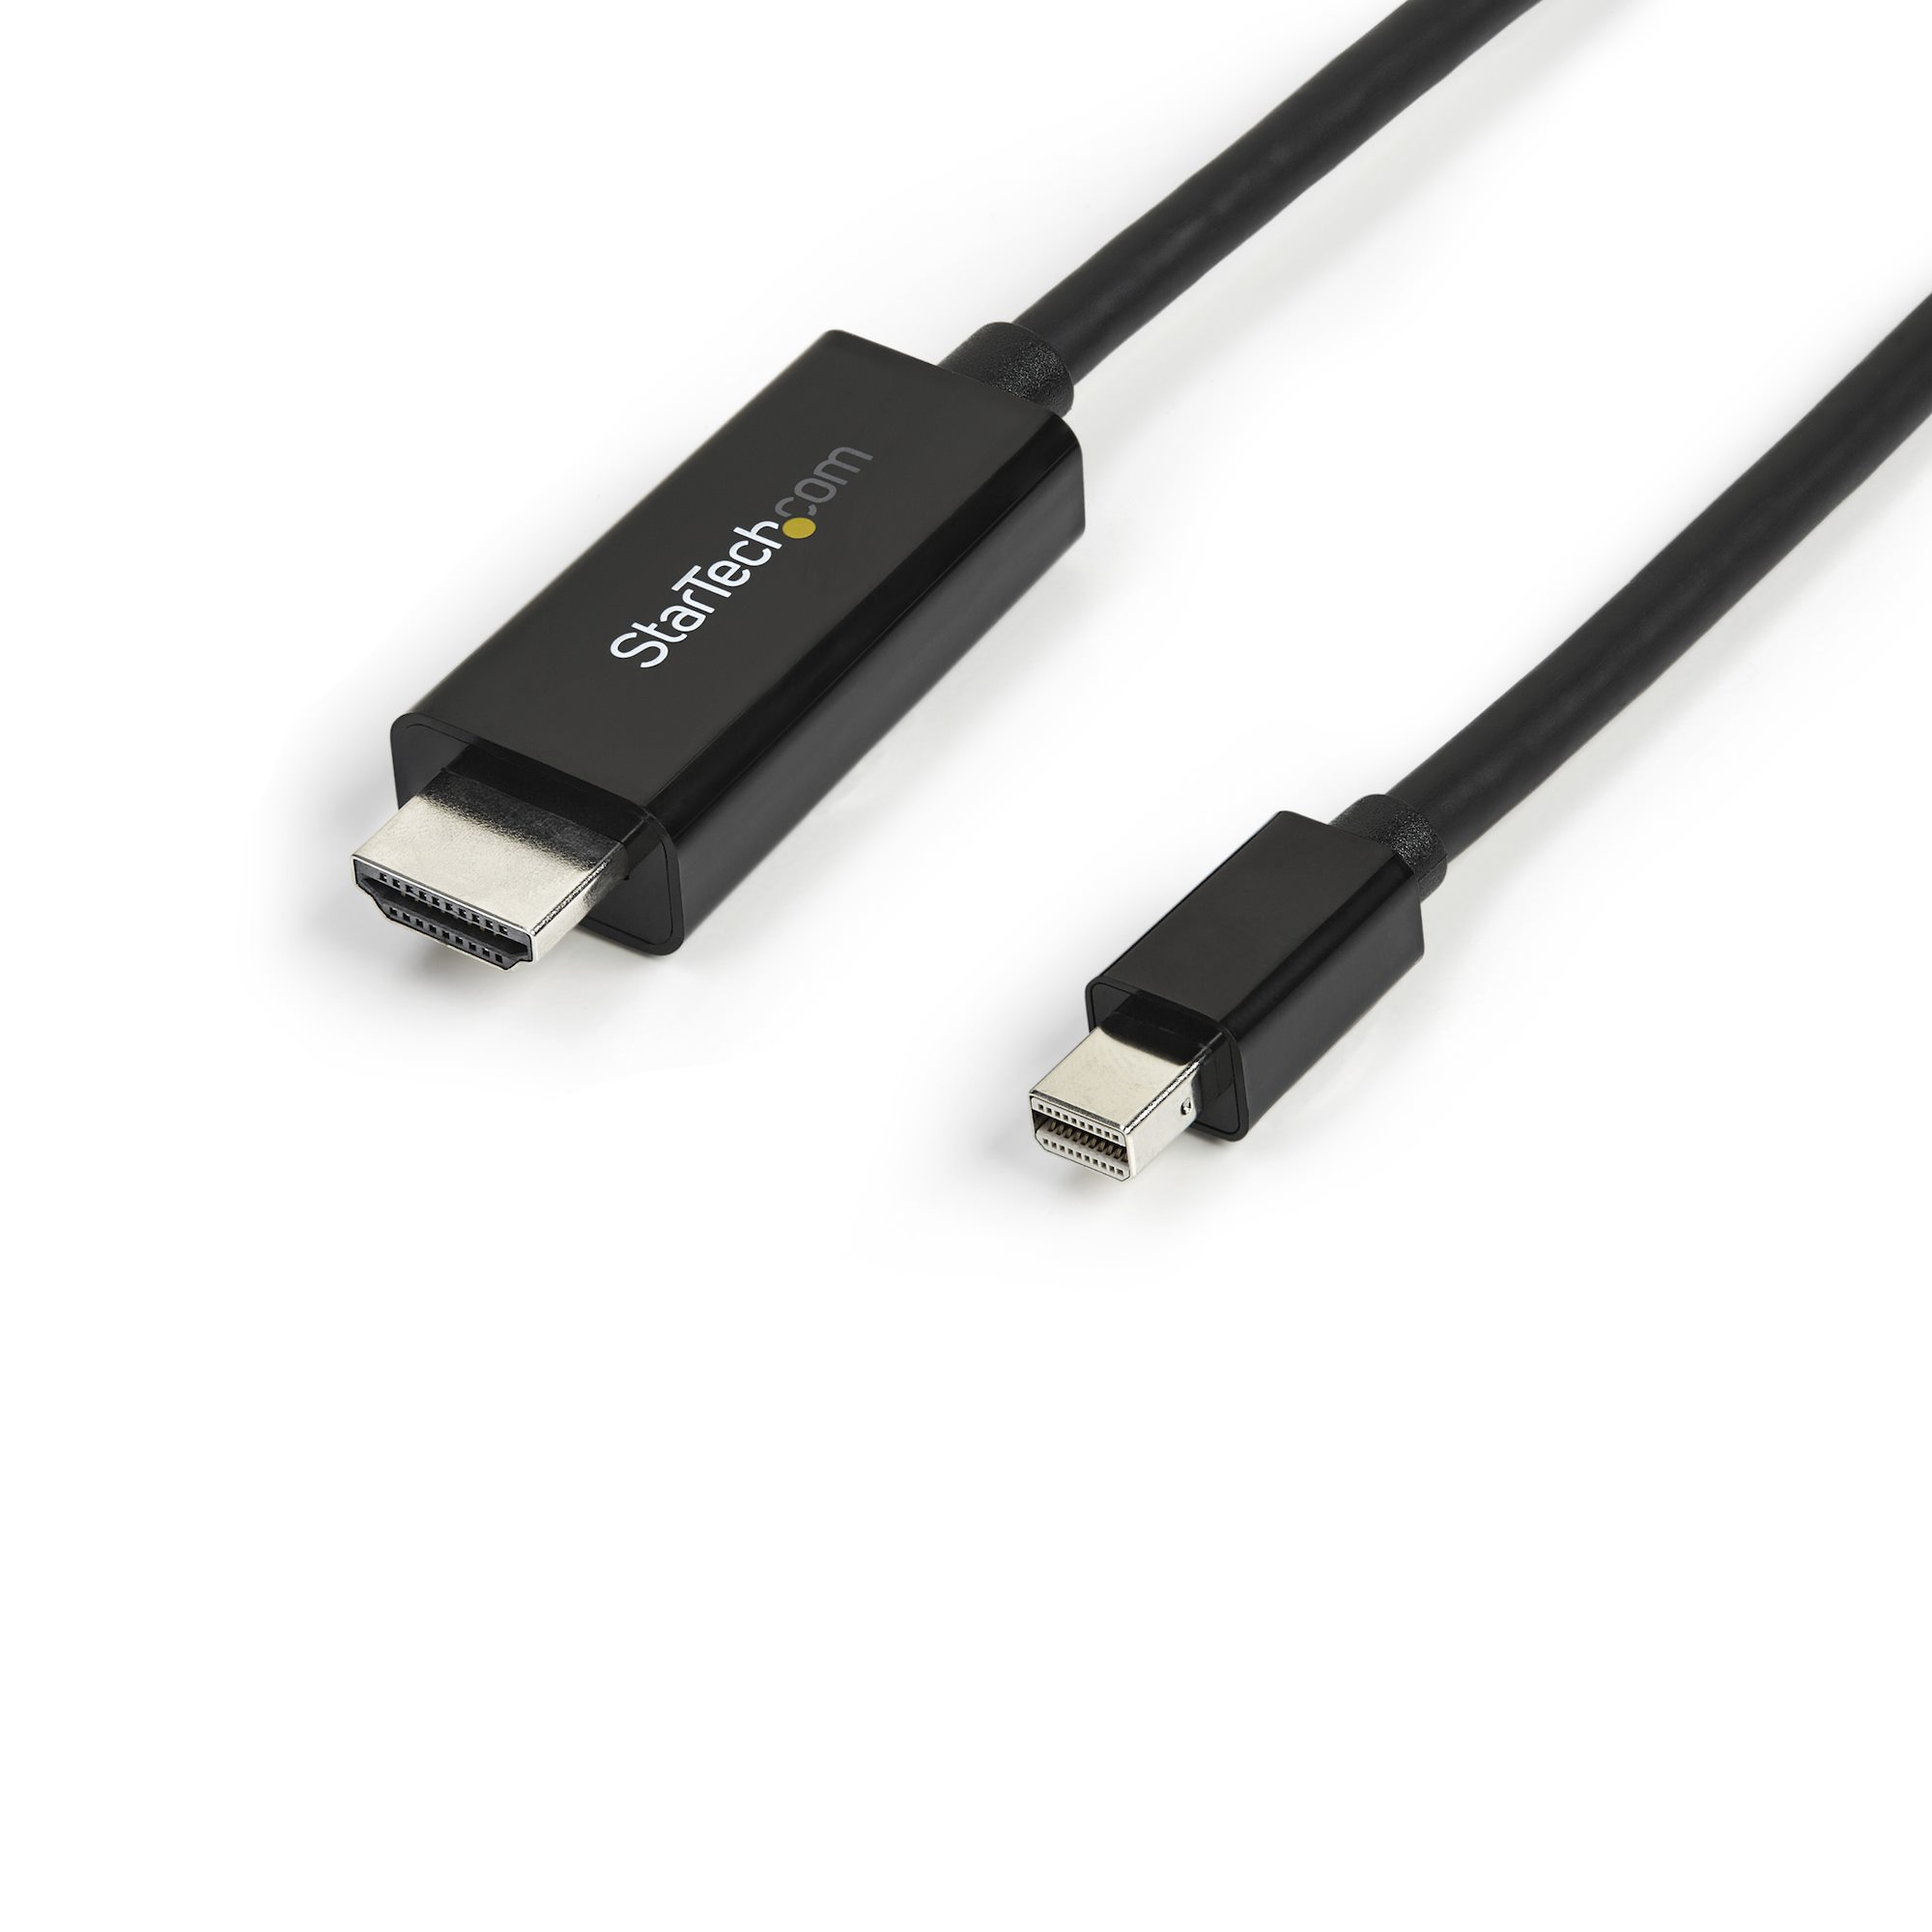 in Black 9.8 Feet Thunderbolt 2 Cable Cable Matters Certified Thunderbolt Cable 